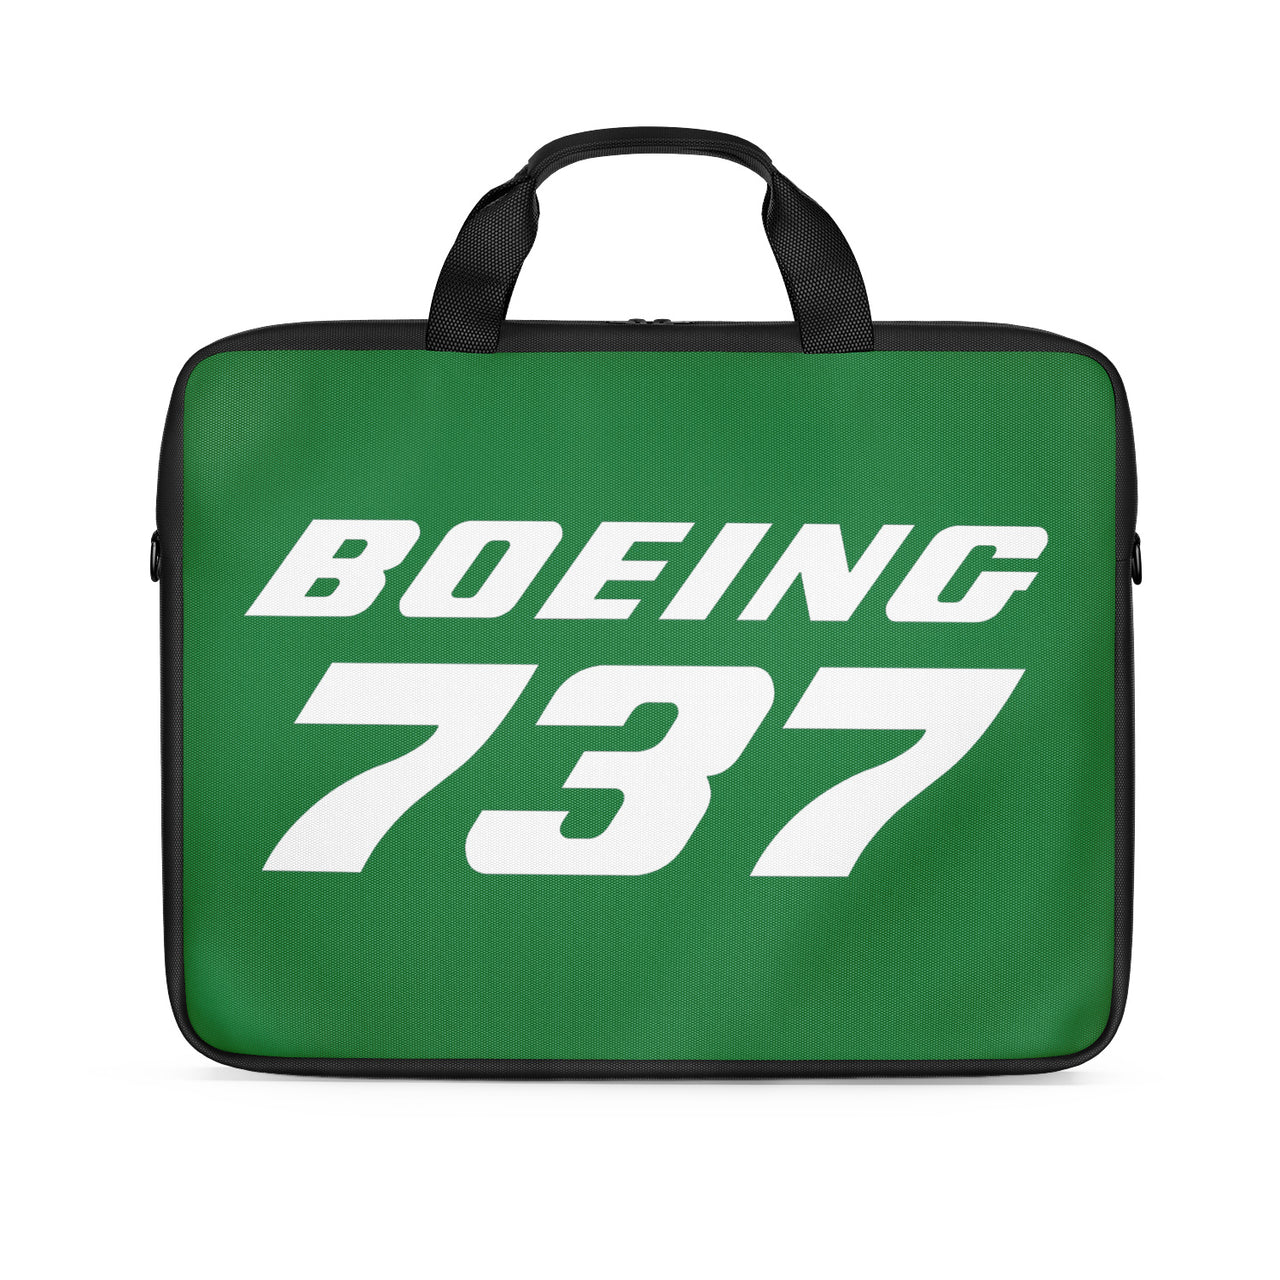 Boeing 737 & Text Designed Laptop & Tablet Bags